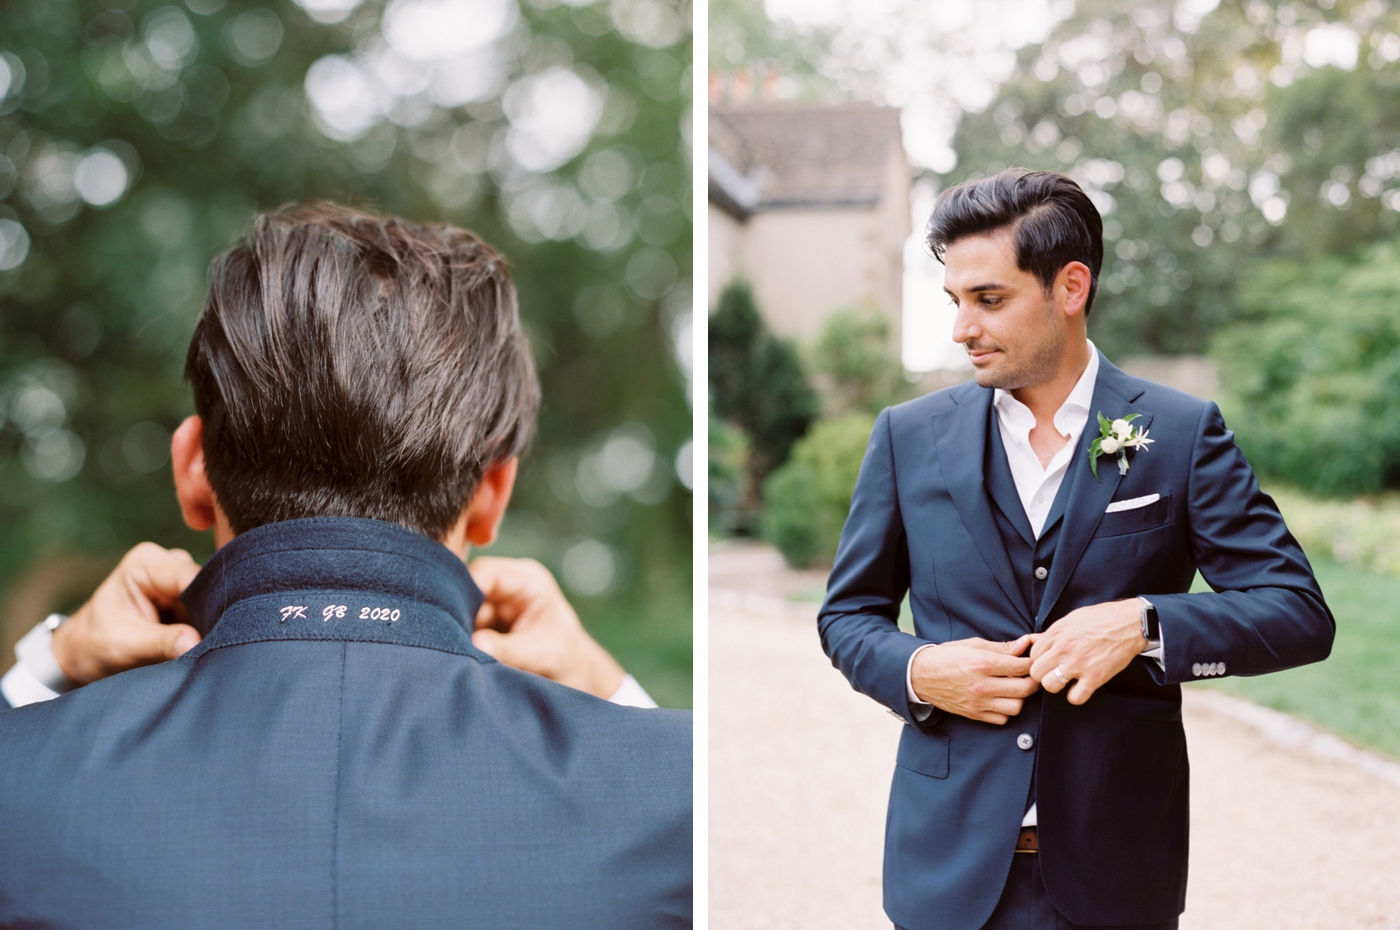 Groom in a custom suit with wedding date embroidered on collar